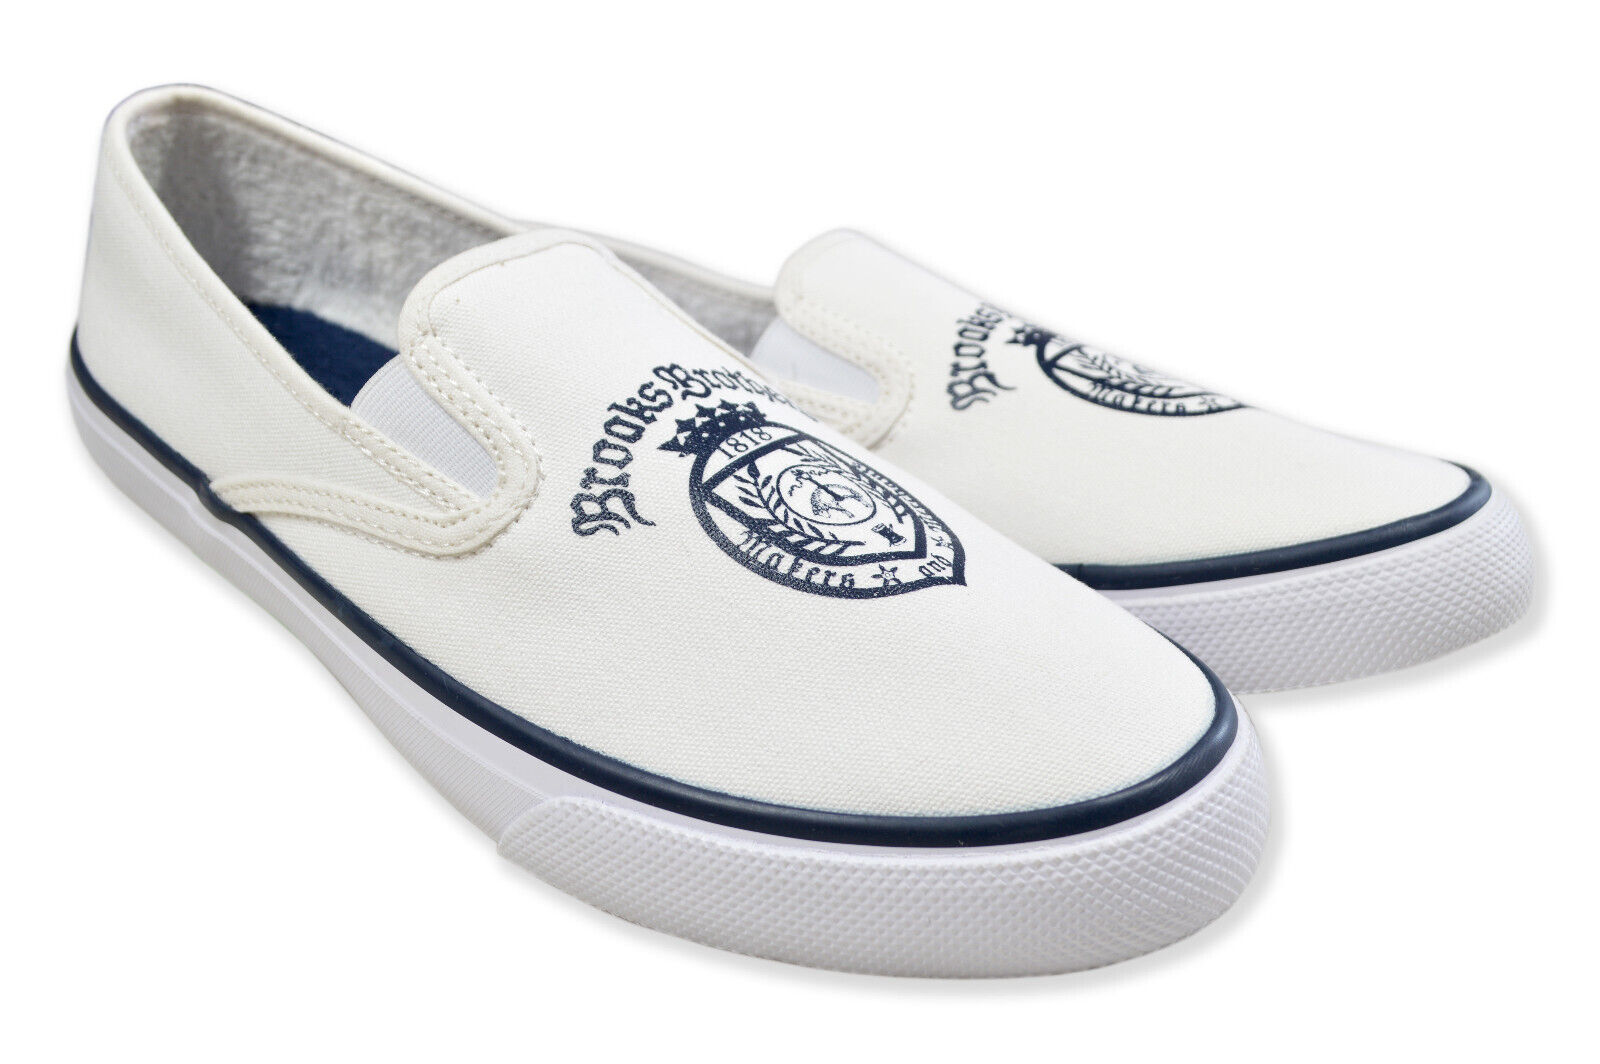 Primary image for Brooks Brothers Sperry White & Navy Crest Canvas Slip On Sneakers, 10 M 8414-9